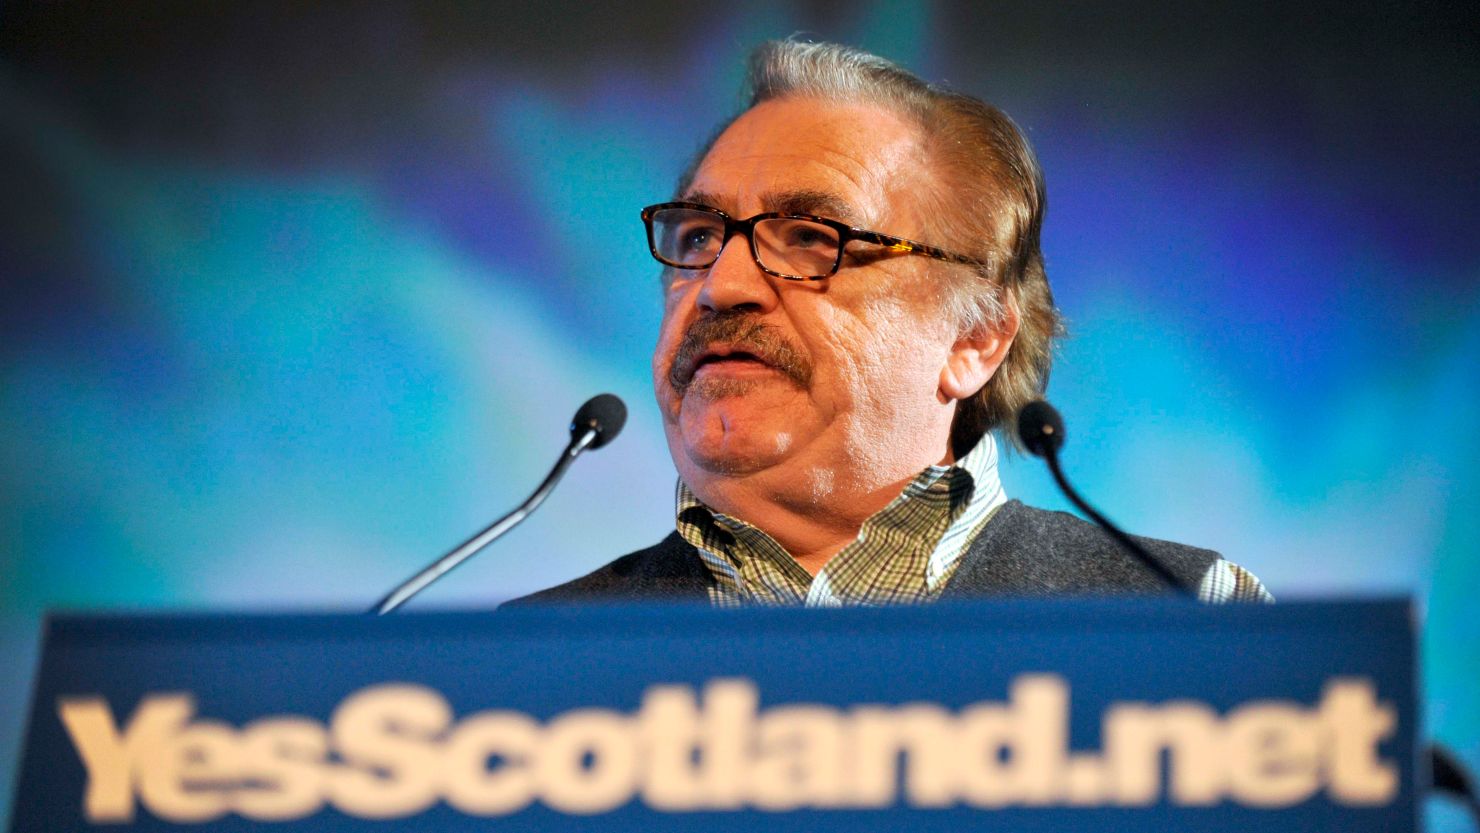 Brian Cox speaks at the launch of the "Yes" campaign for Scottish independence in 2012.